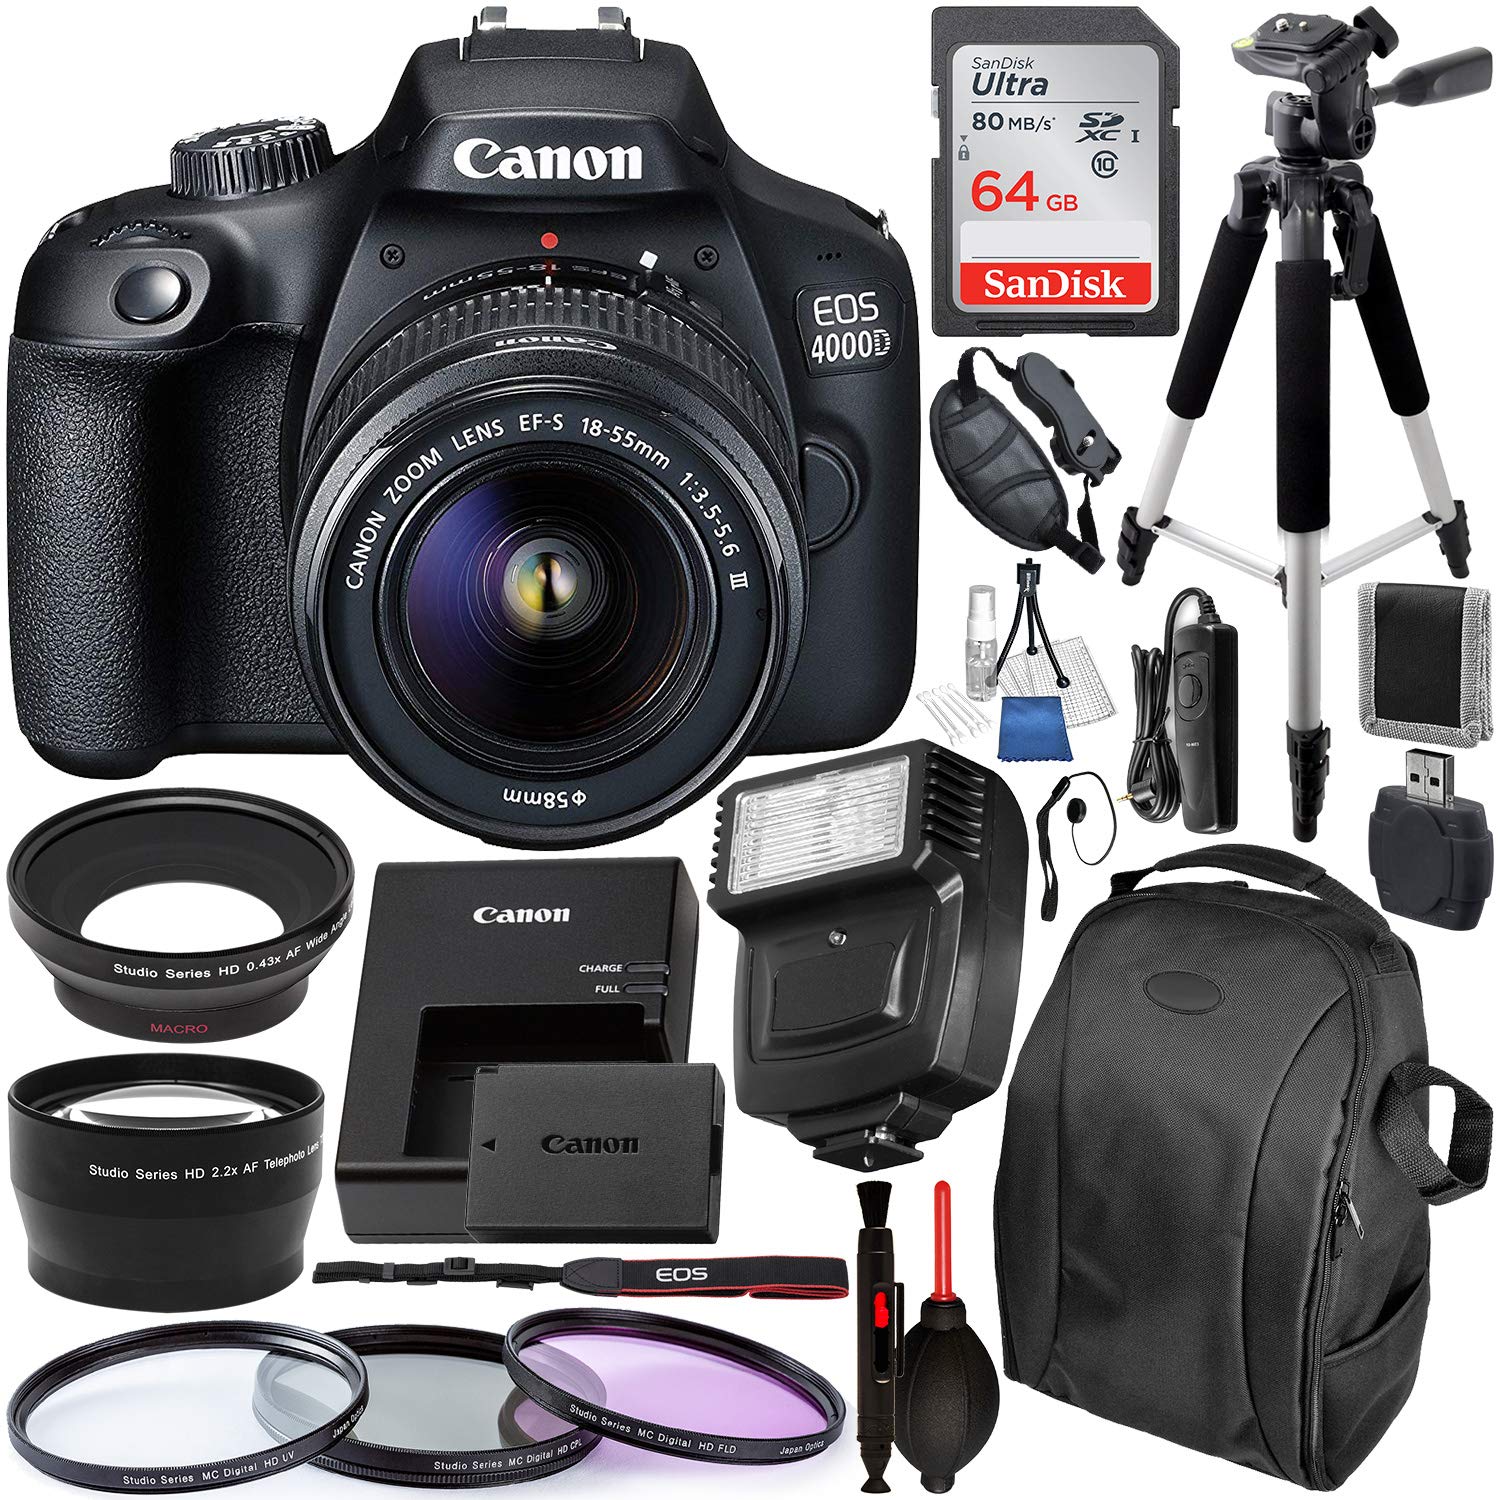 Canon EOS 4000D / Rebel T100 DSLR Camera with 18-55mm III Lens and Essential Accessory Bundle